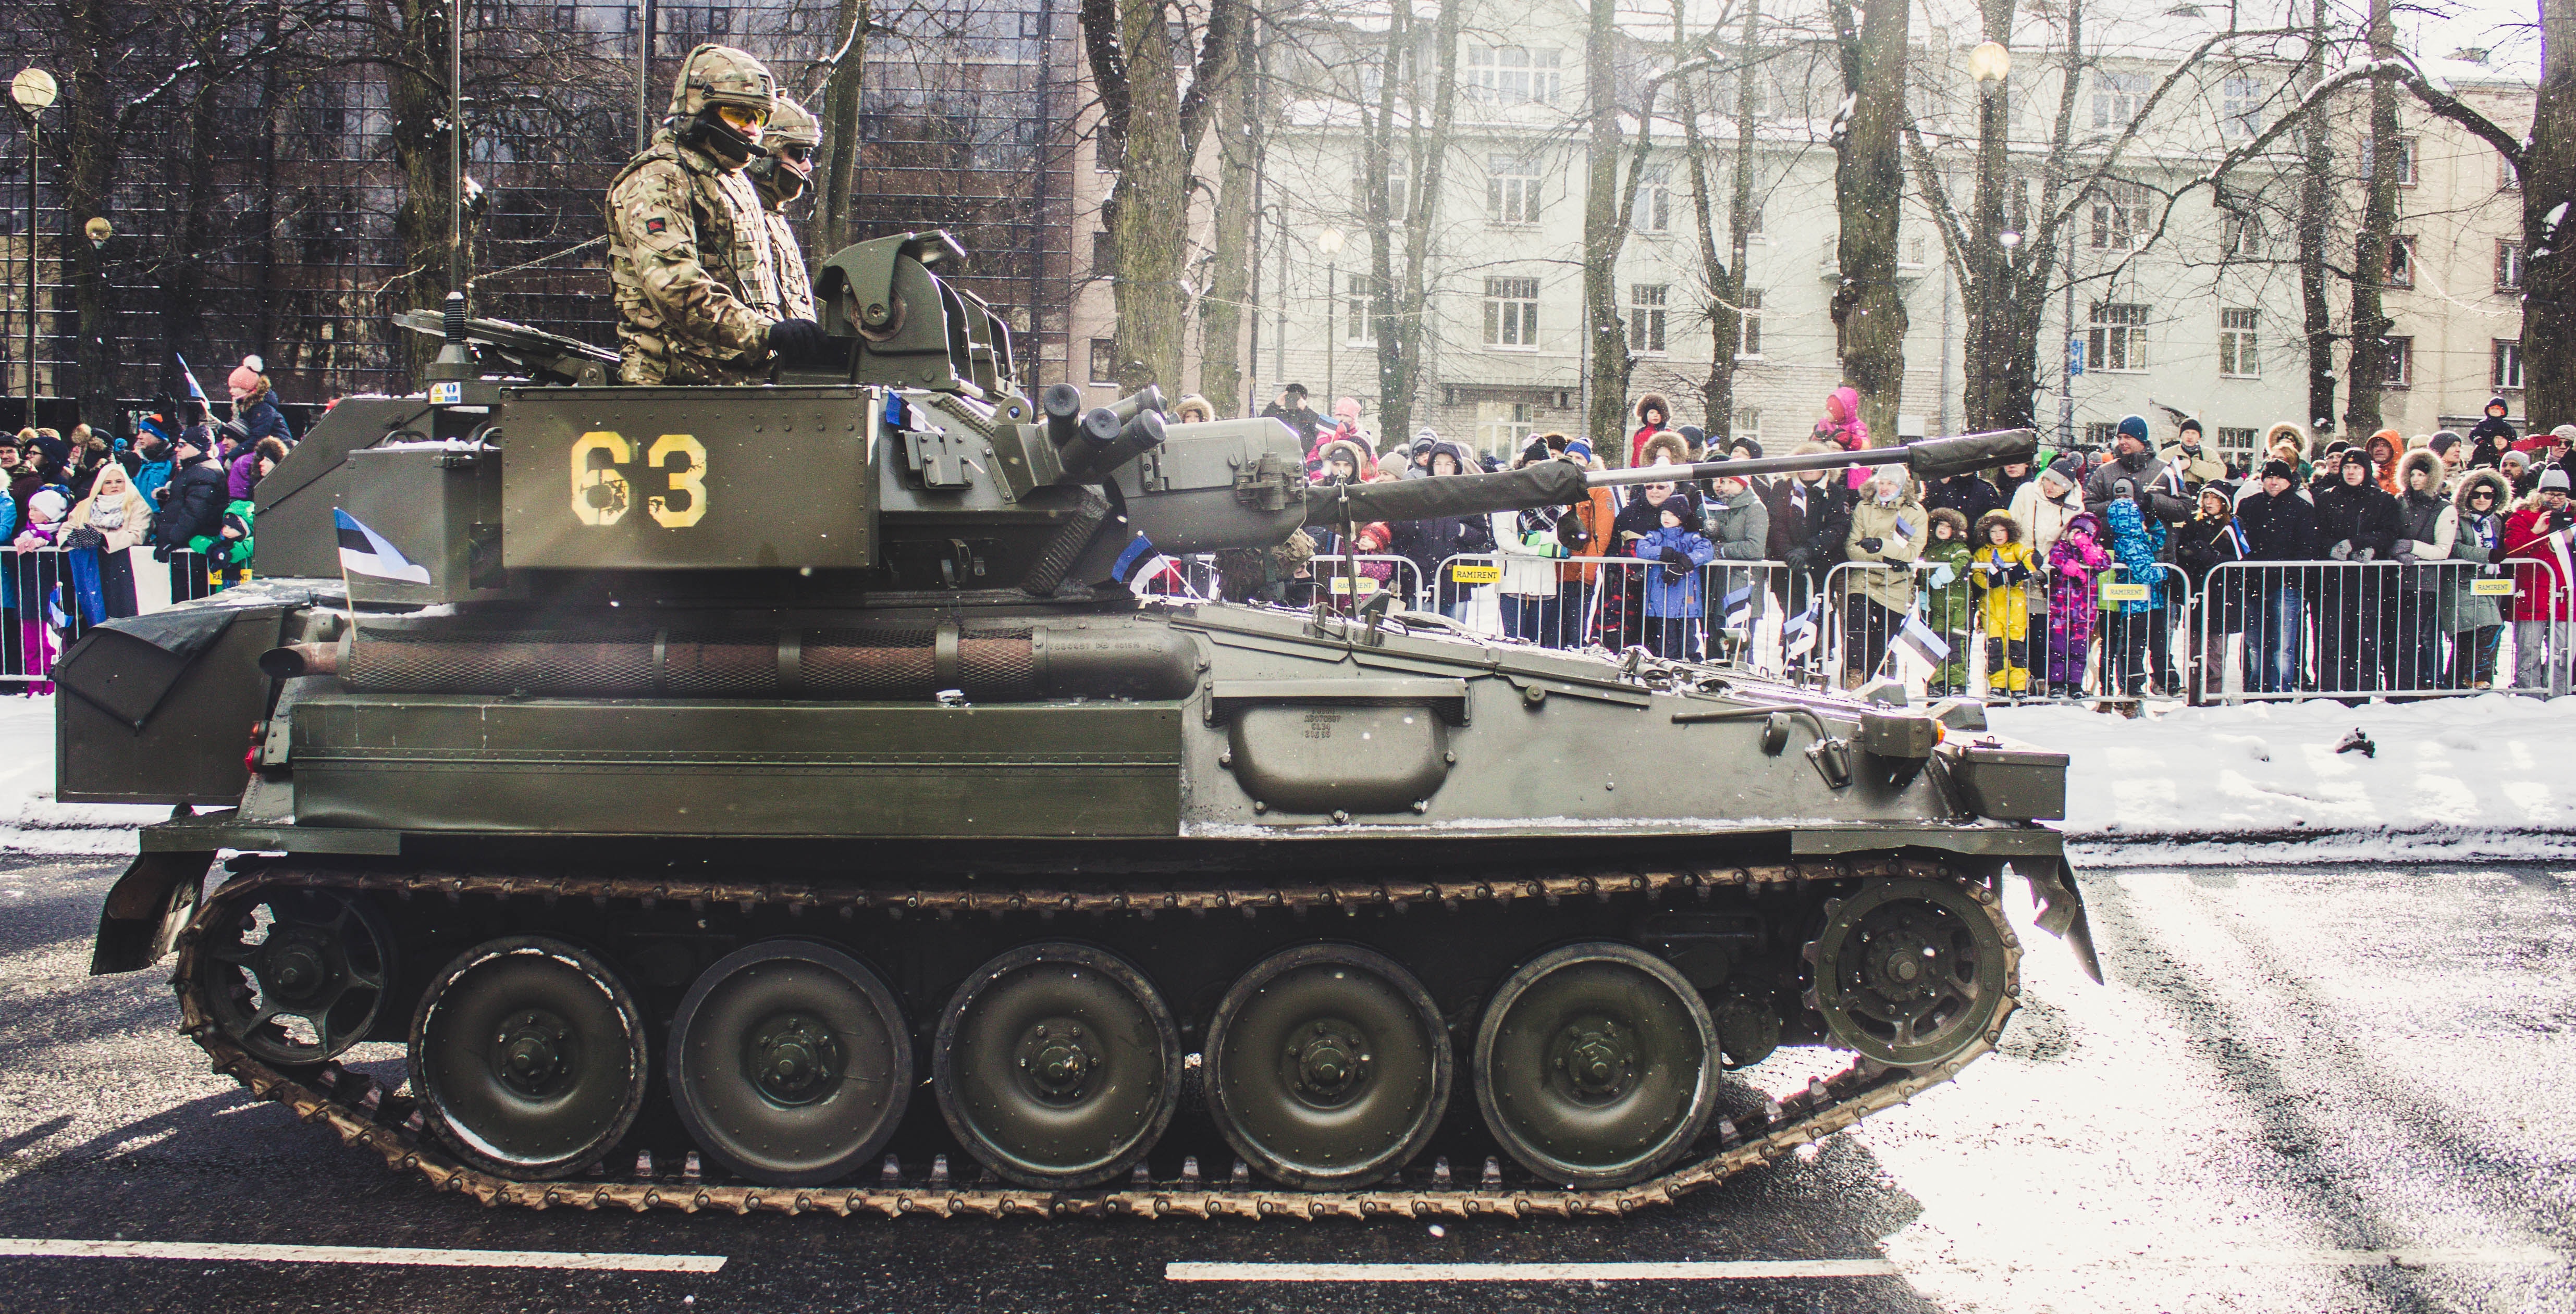 Two soldiers ride on green military tank surrounded with people photo